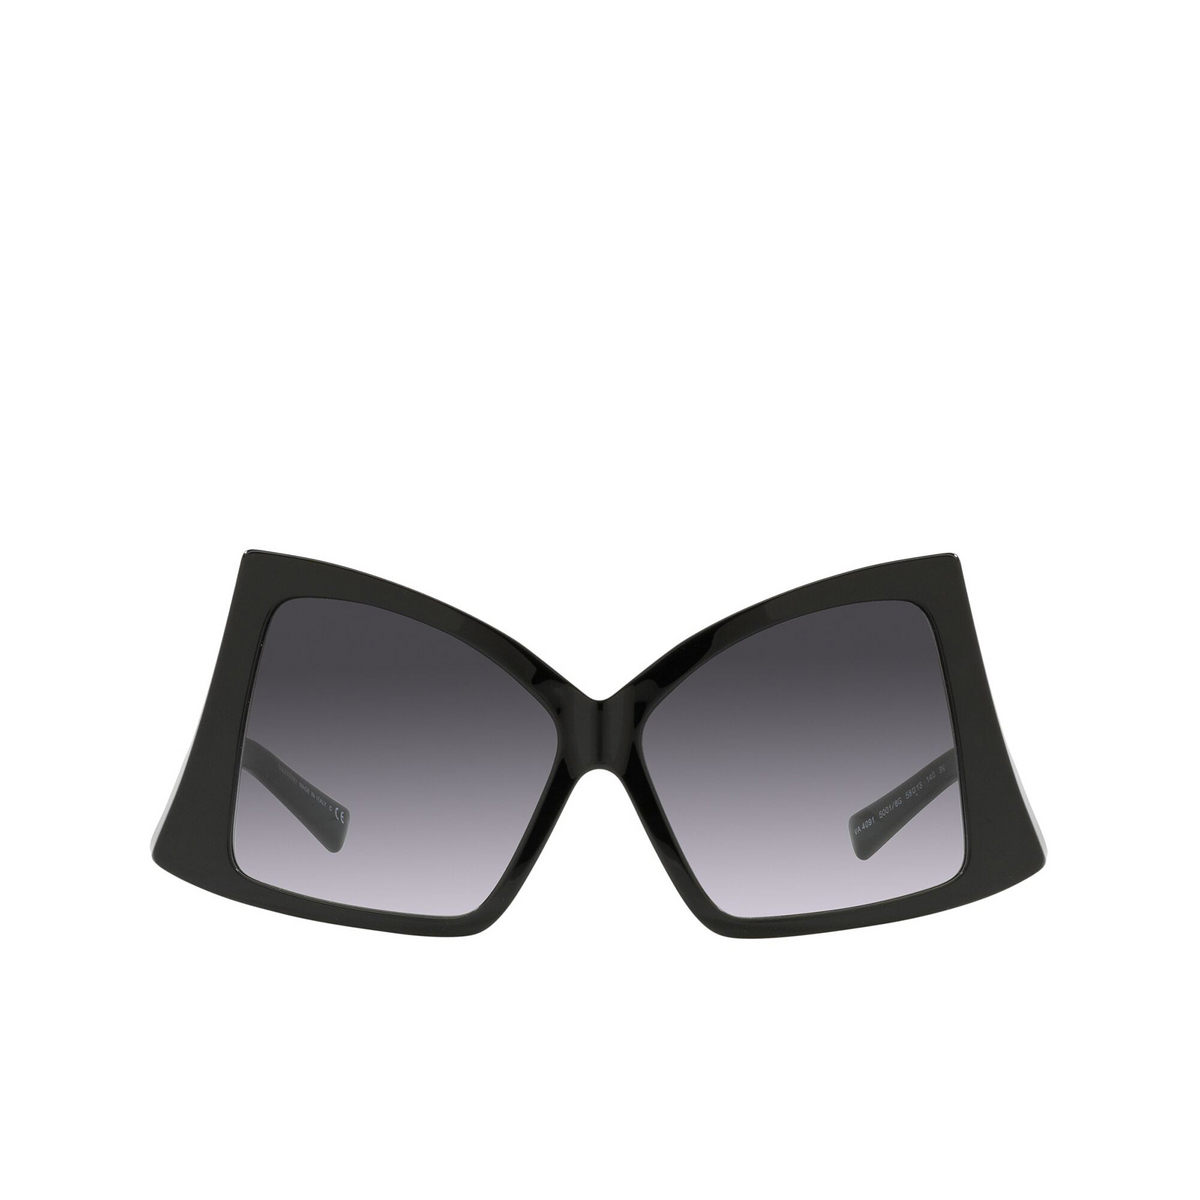 Valentino® Butterfly Sunglasses: VA4091 color Black 50018G - front view.